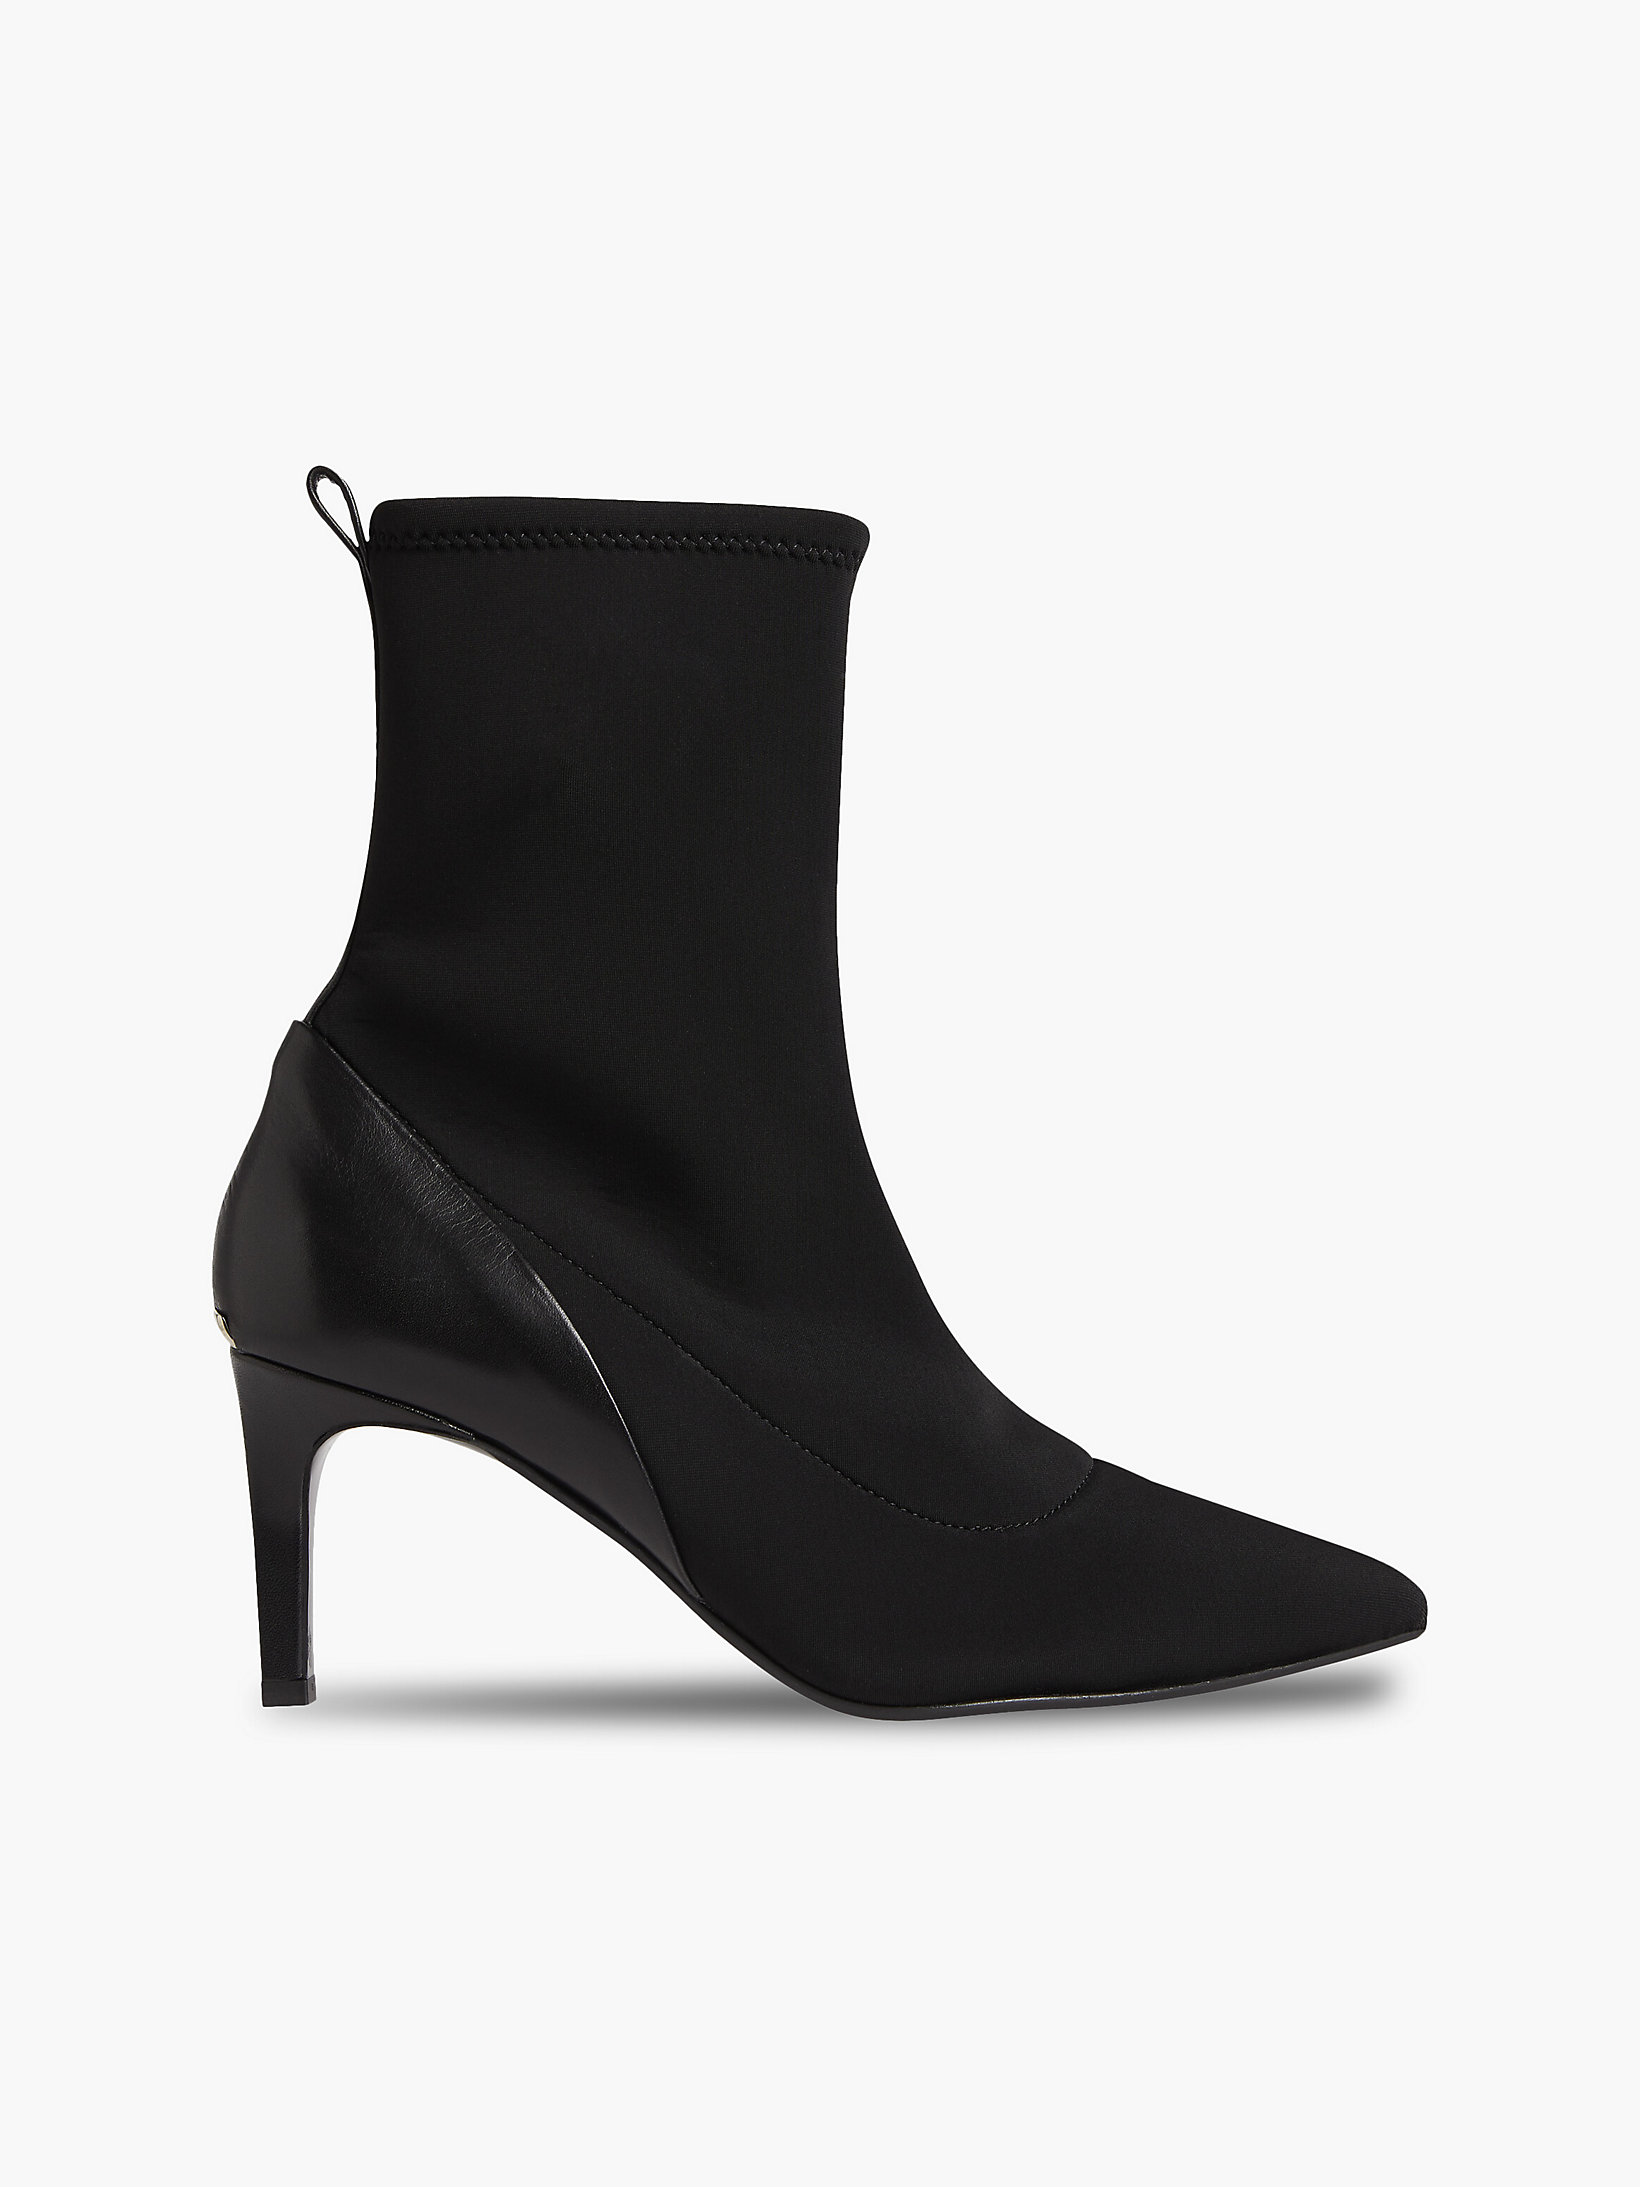 CK Black Neoprene And Leather Heeled Ankle Boots undefined women Calvin Klein